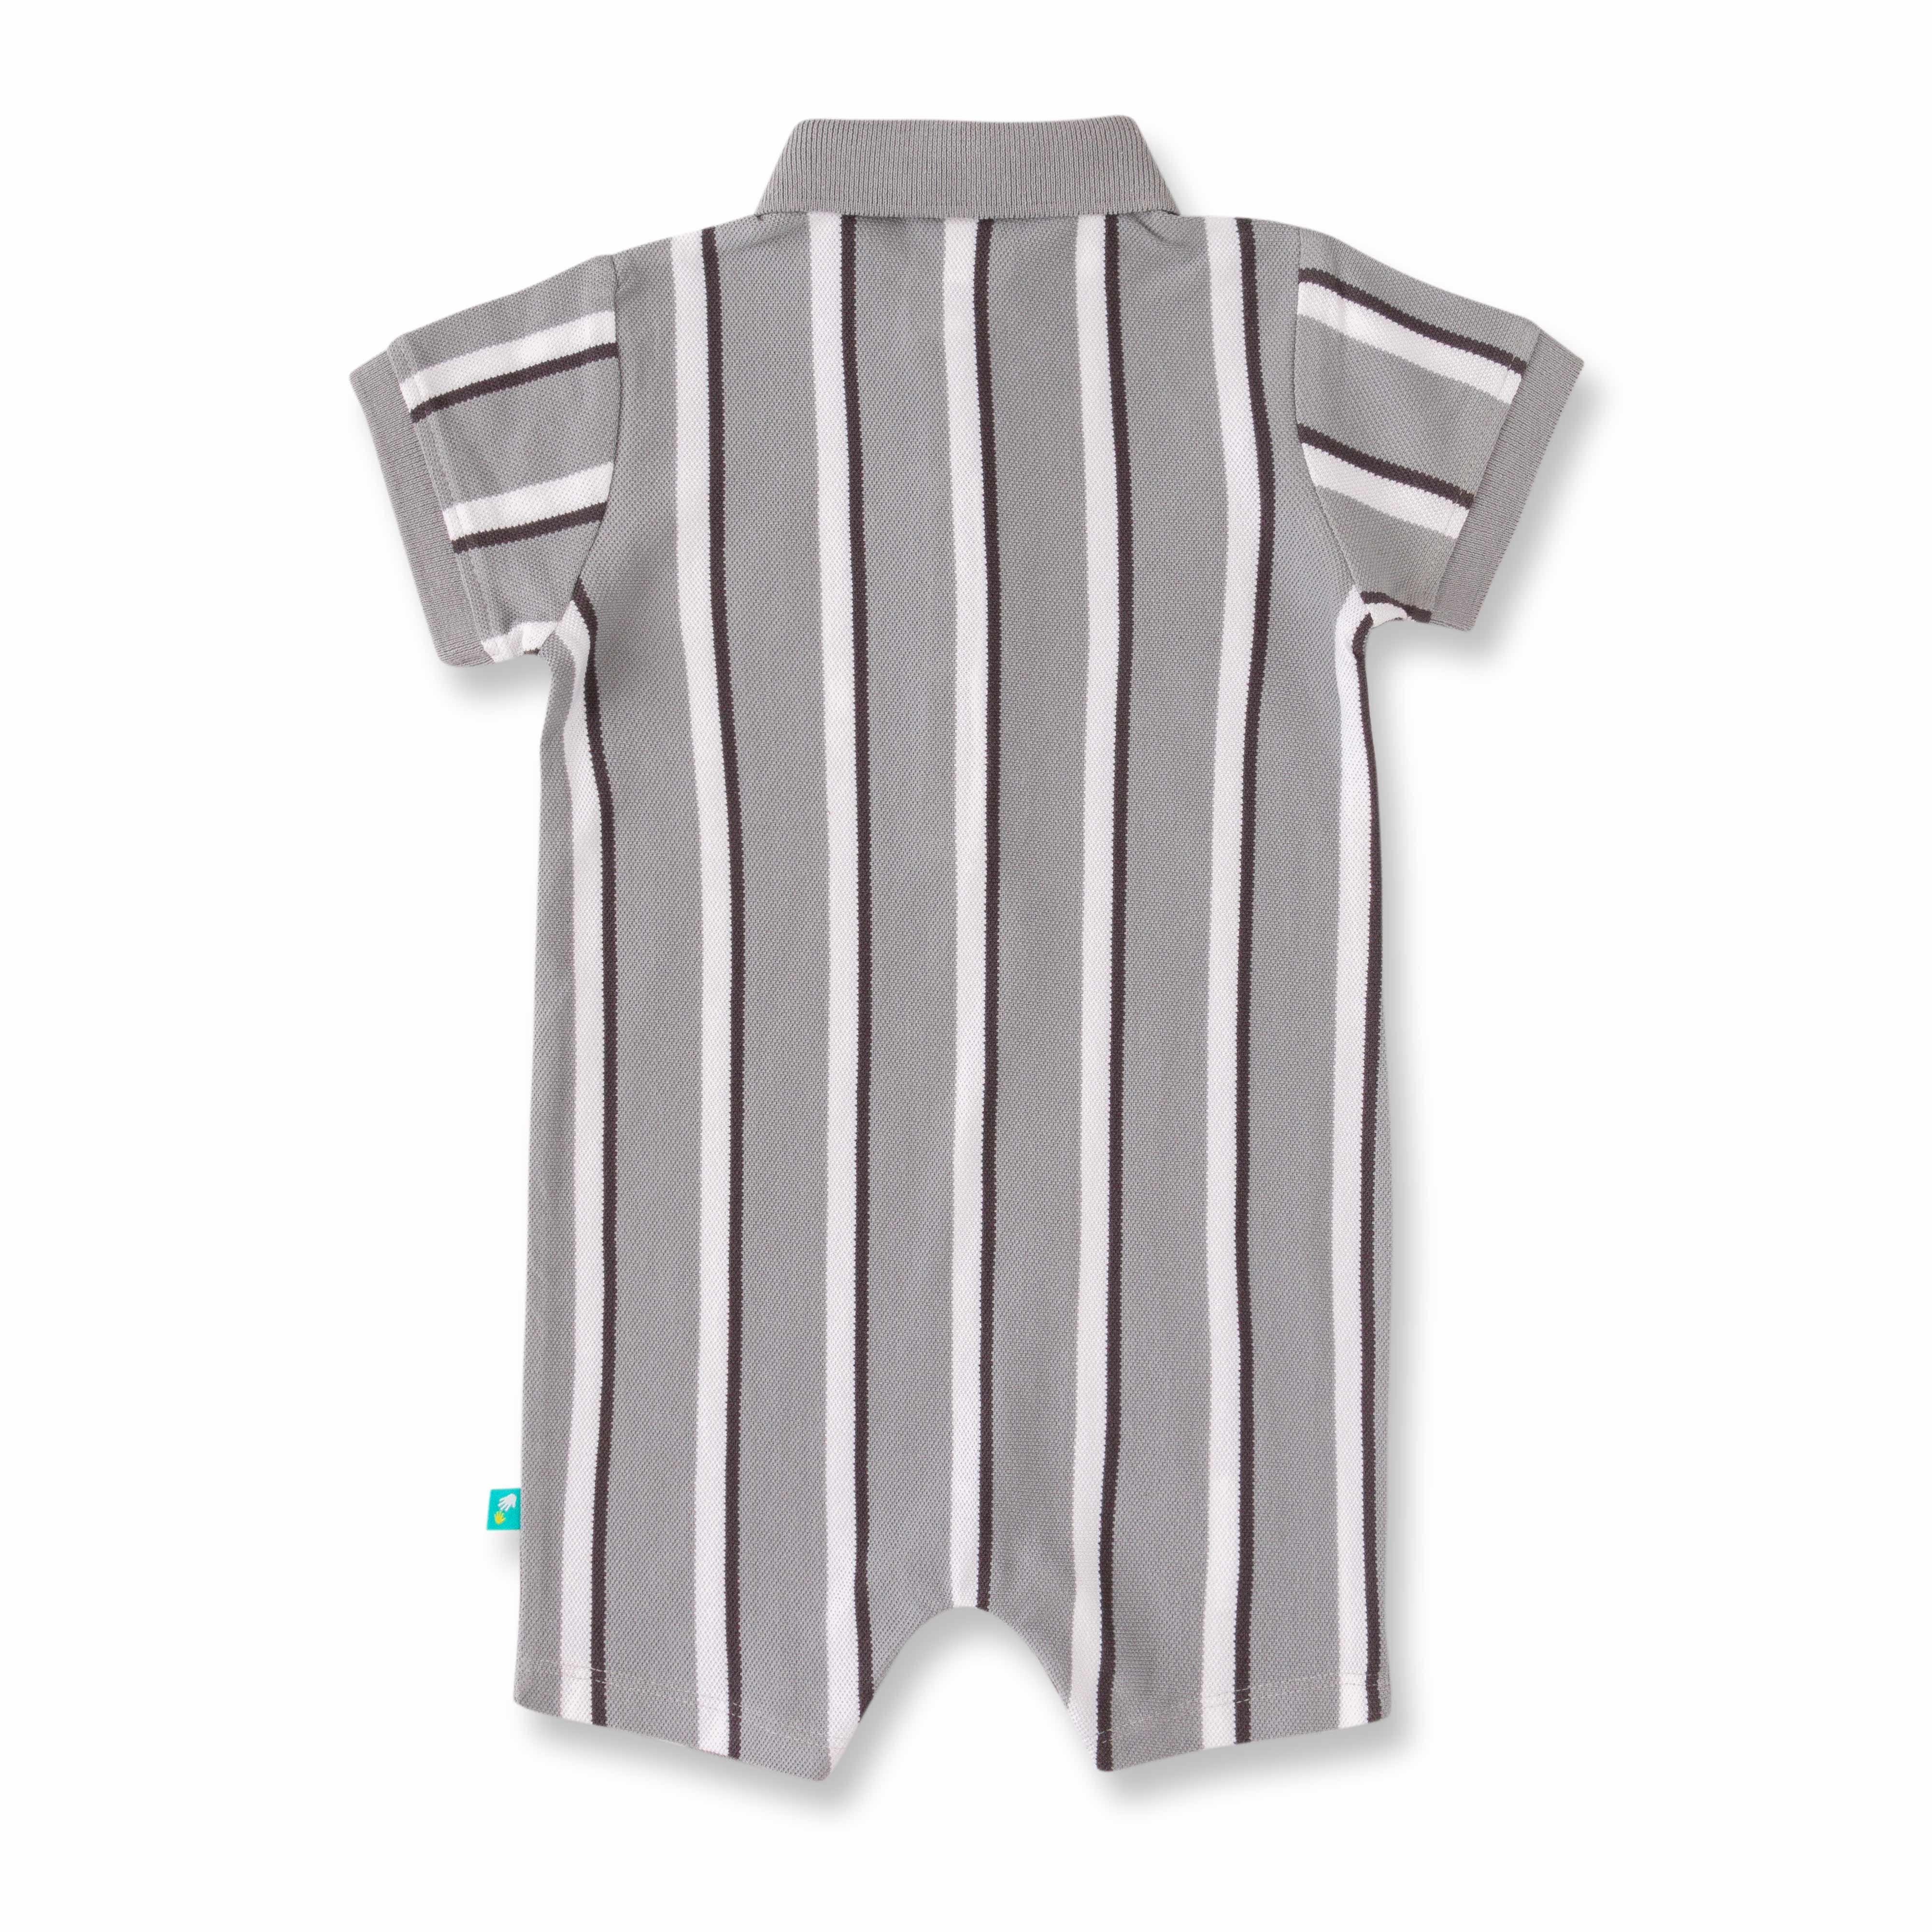 New Born Baby Boy Striped Graphic Print Romper - Juscubs